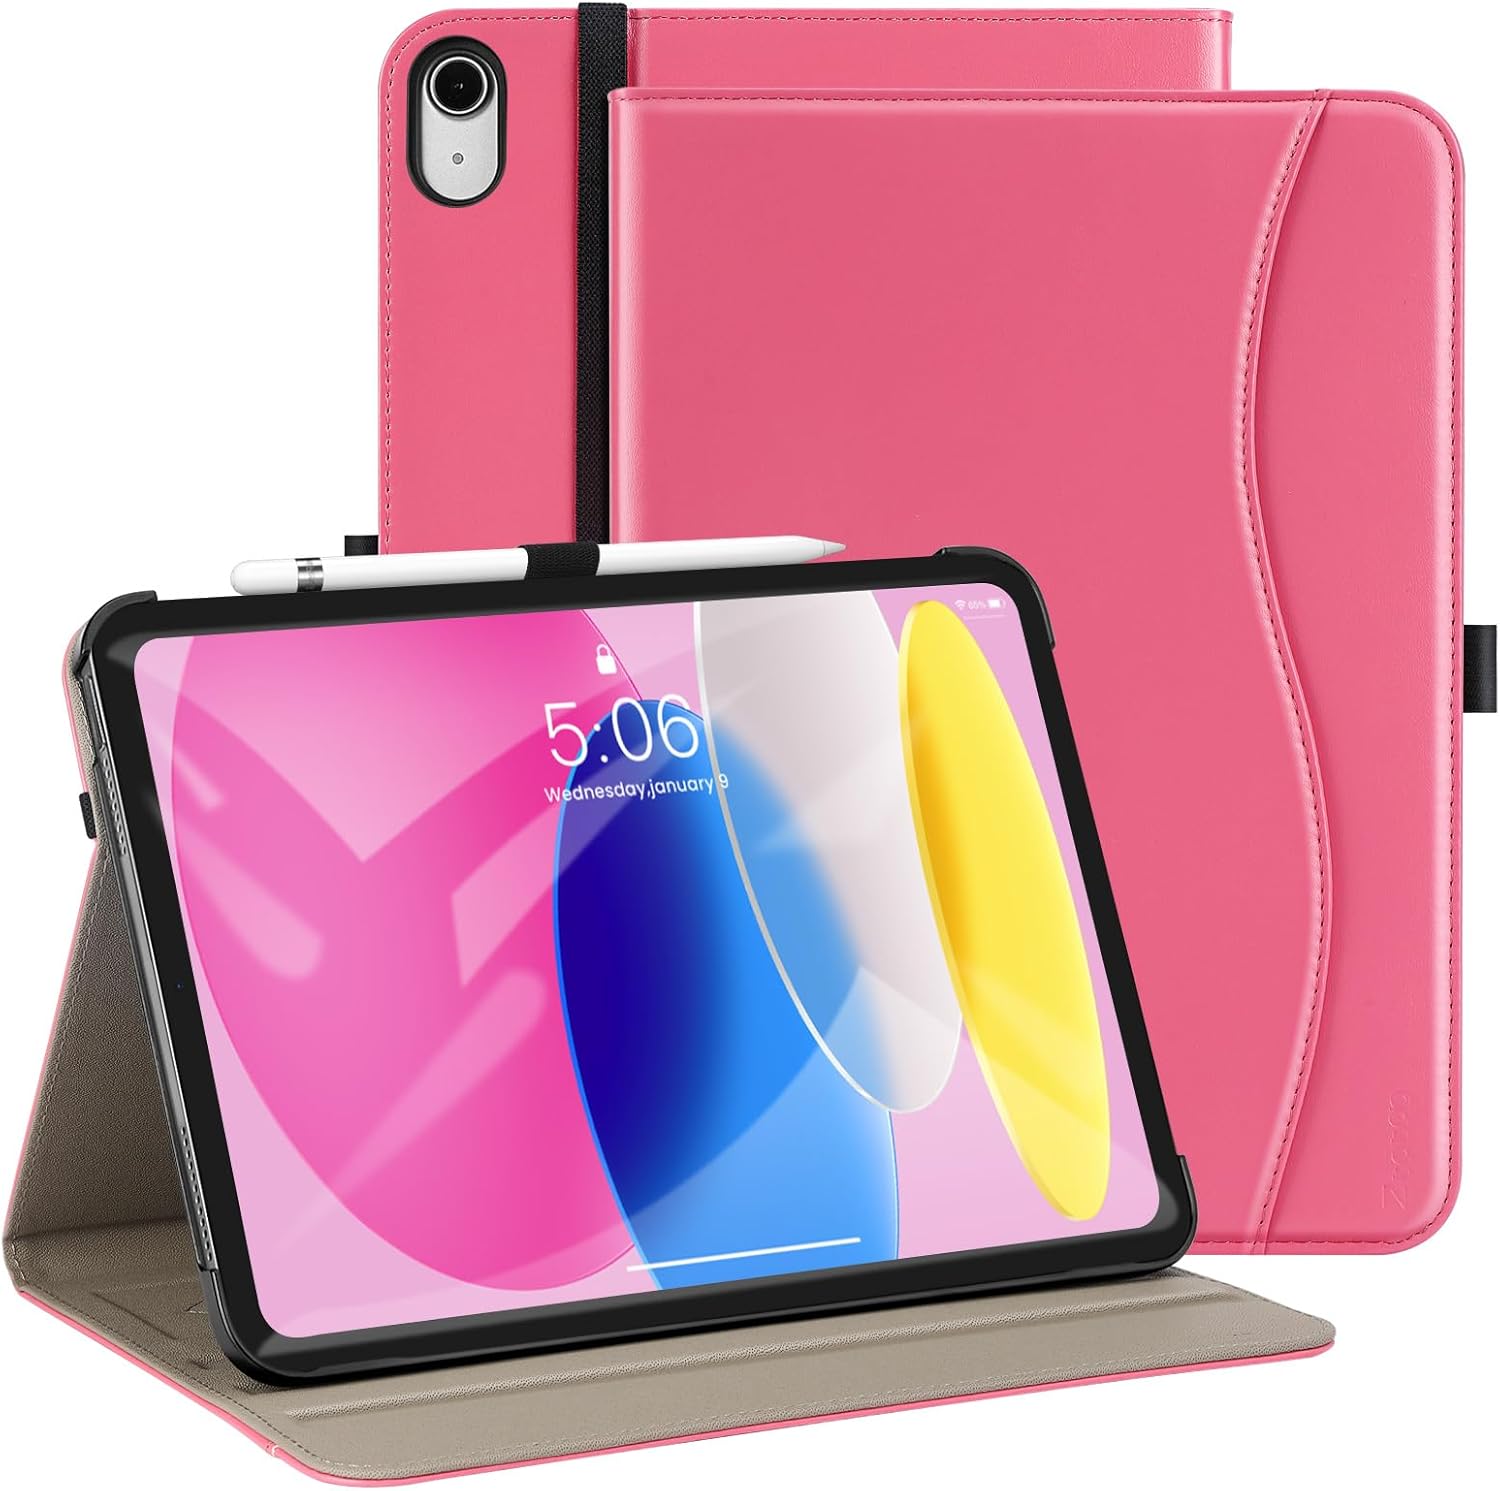 ZtotopCases Case for iPad 10th Generation,10.9 Inch 2022 Model, Premium Leather Business Cover with Auto Wake/Sleep Function, Multi-Angle Viewing Stand Cover with Pocket & Pencil Holder, pink